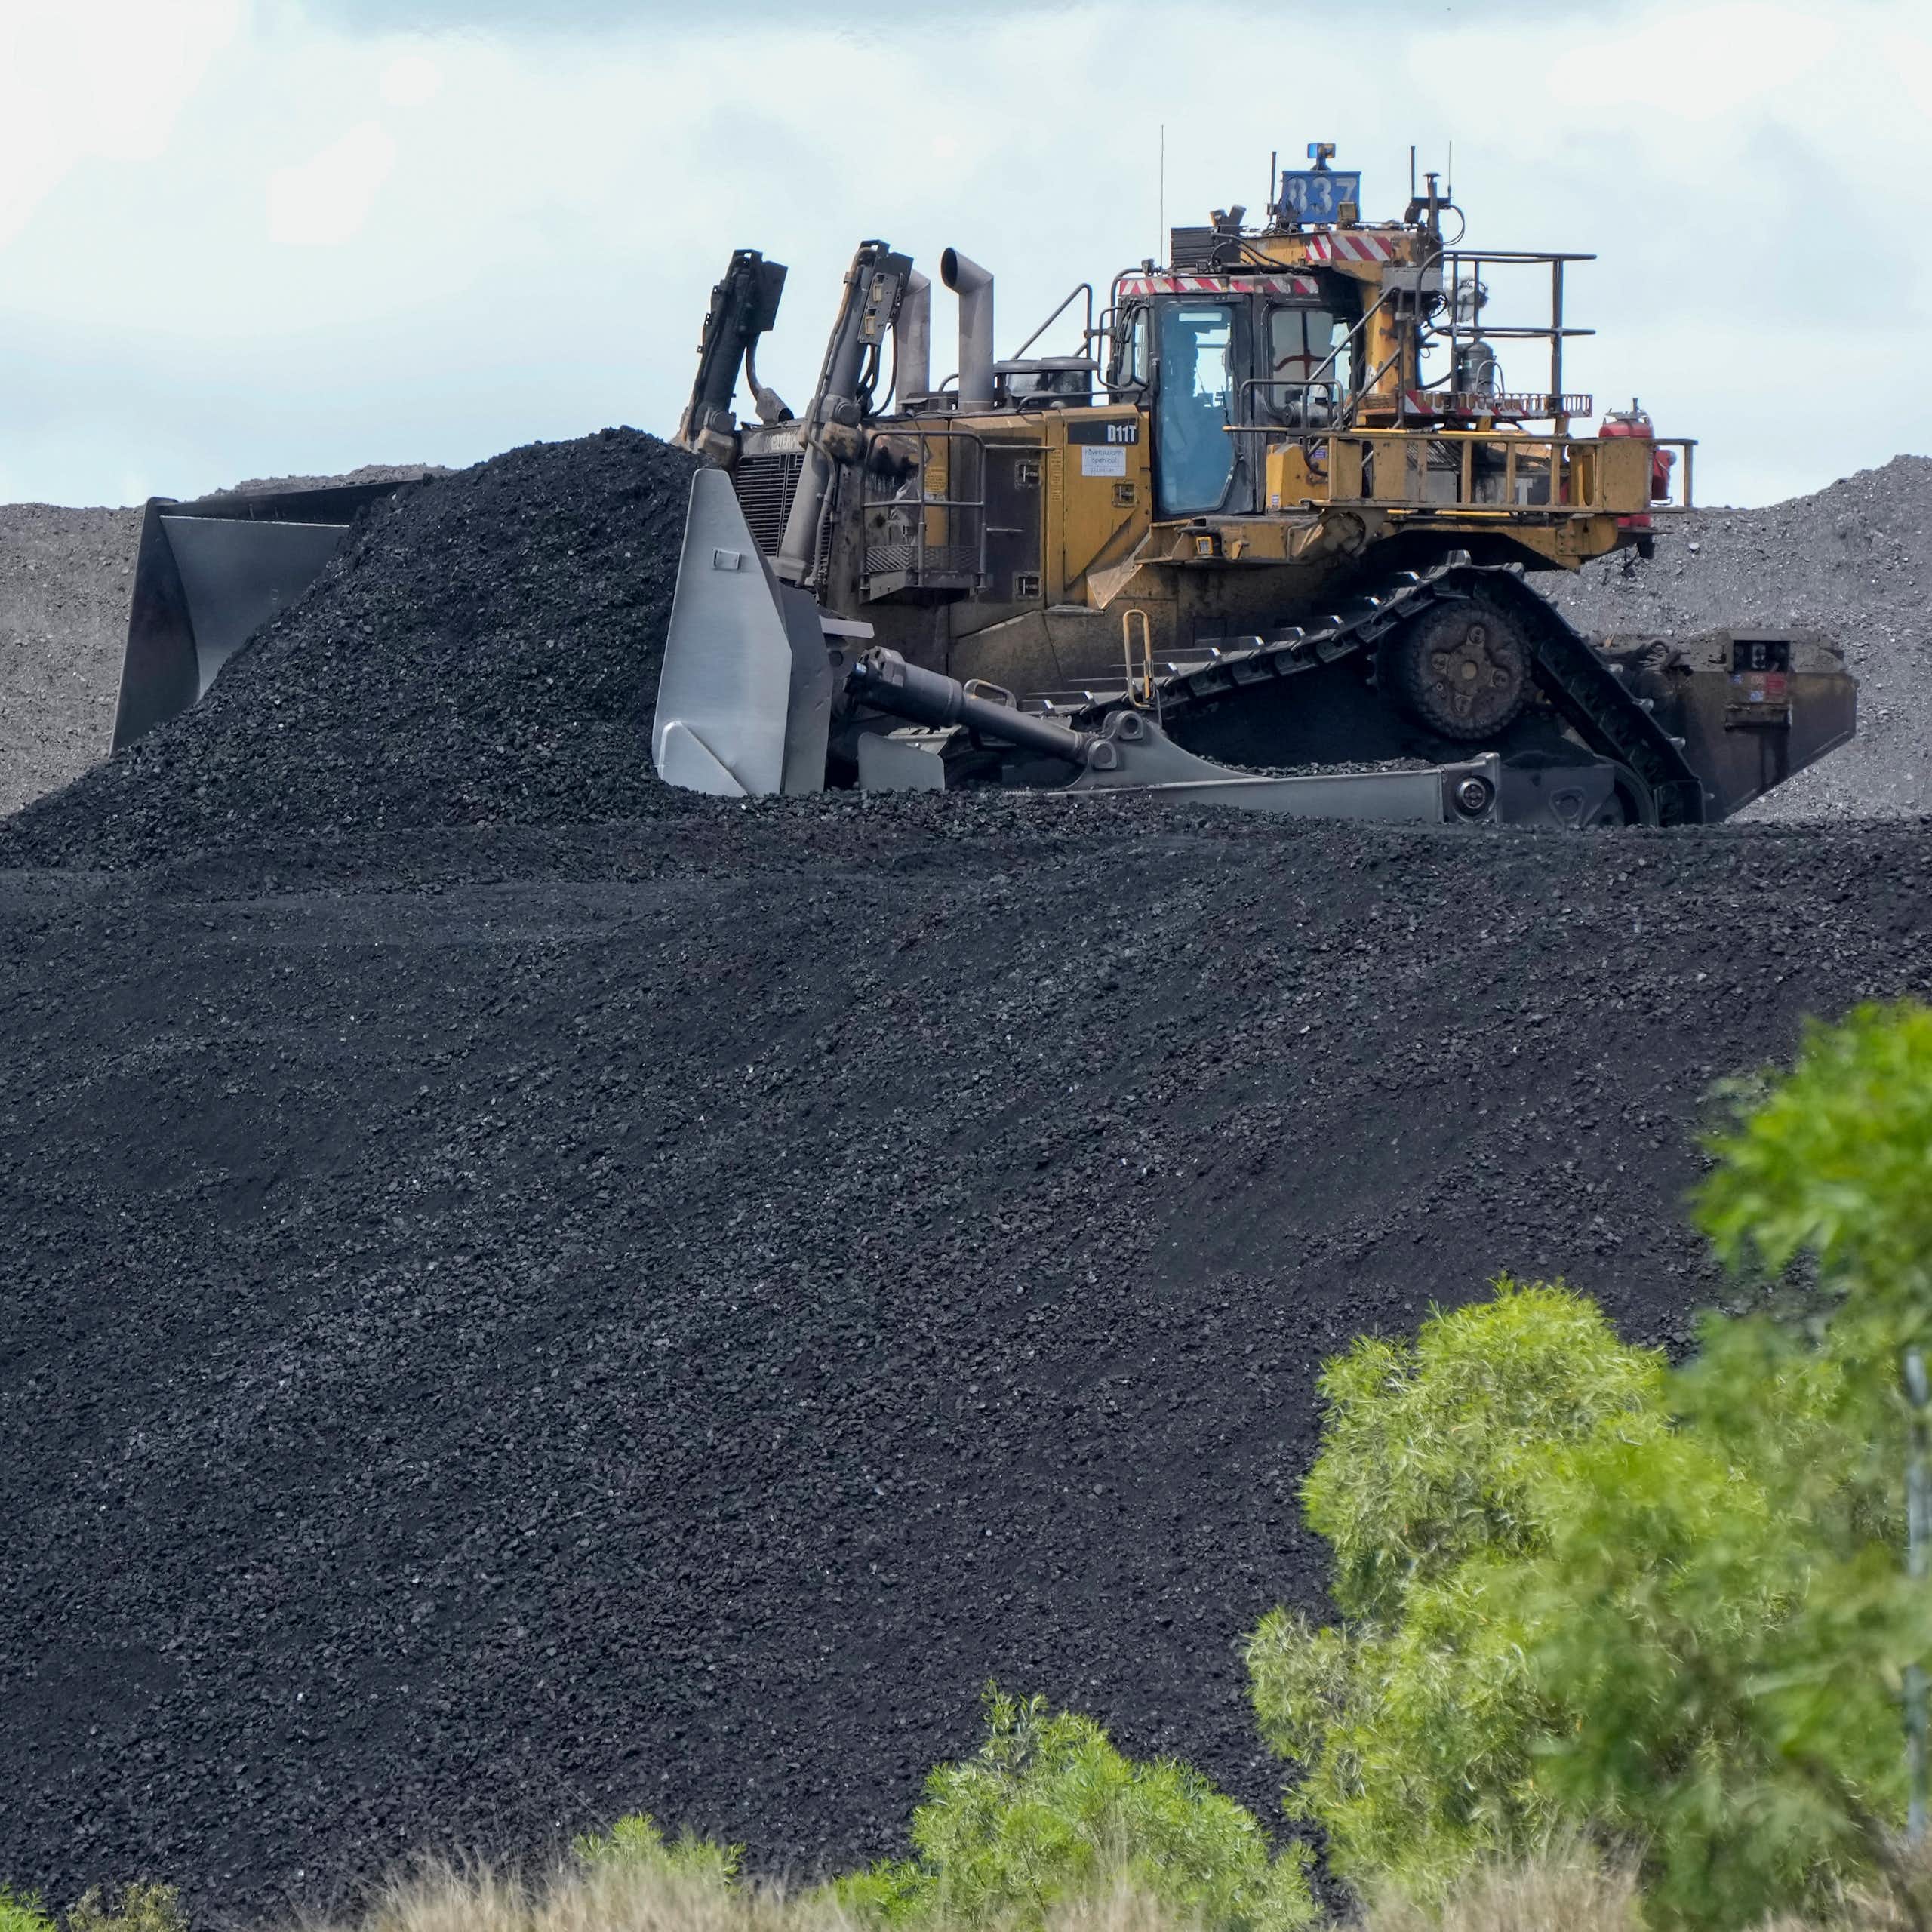 Coal mining near Muswellbrook in the Hunter Valley, NSW.